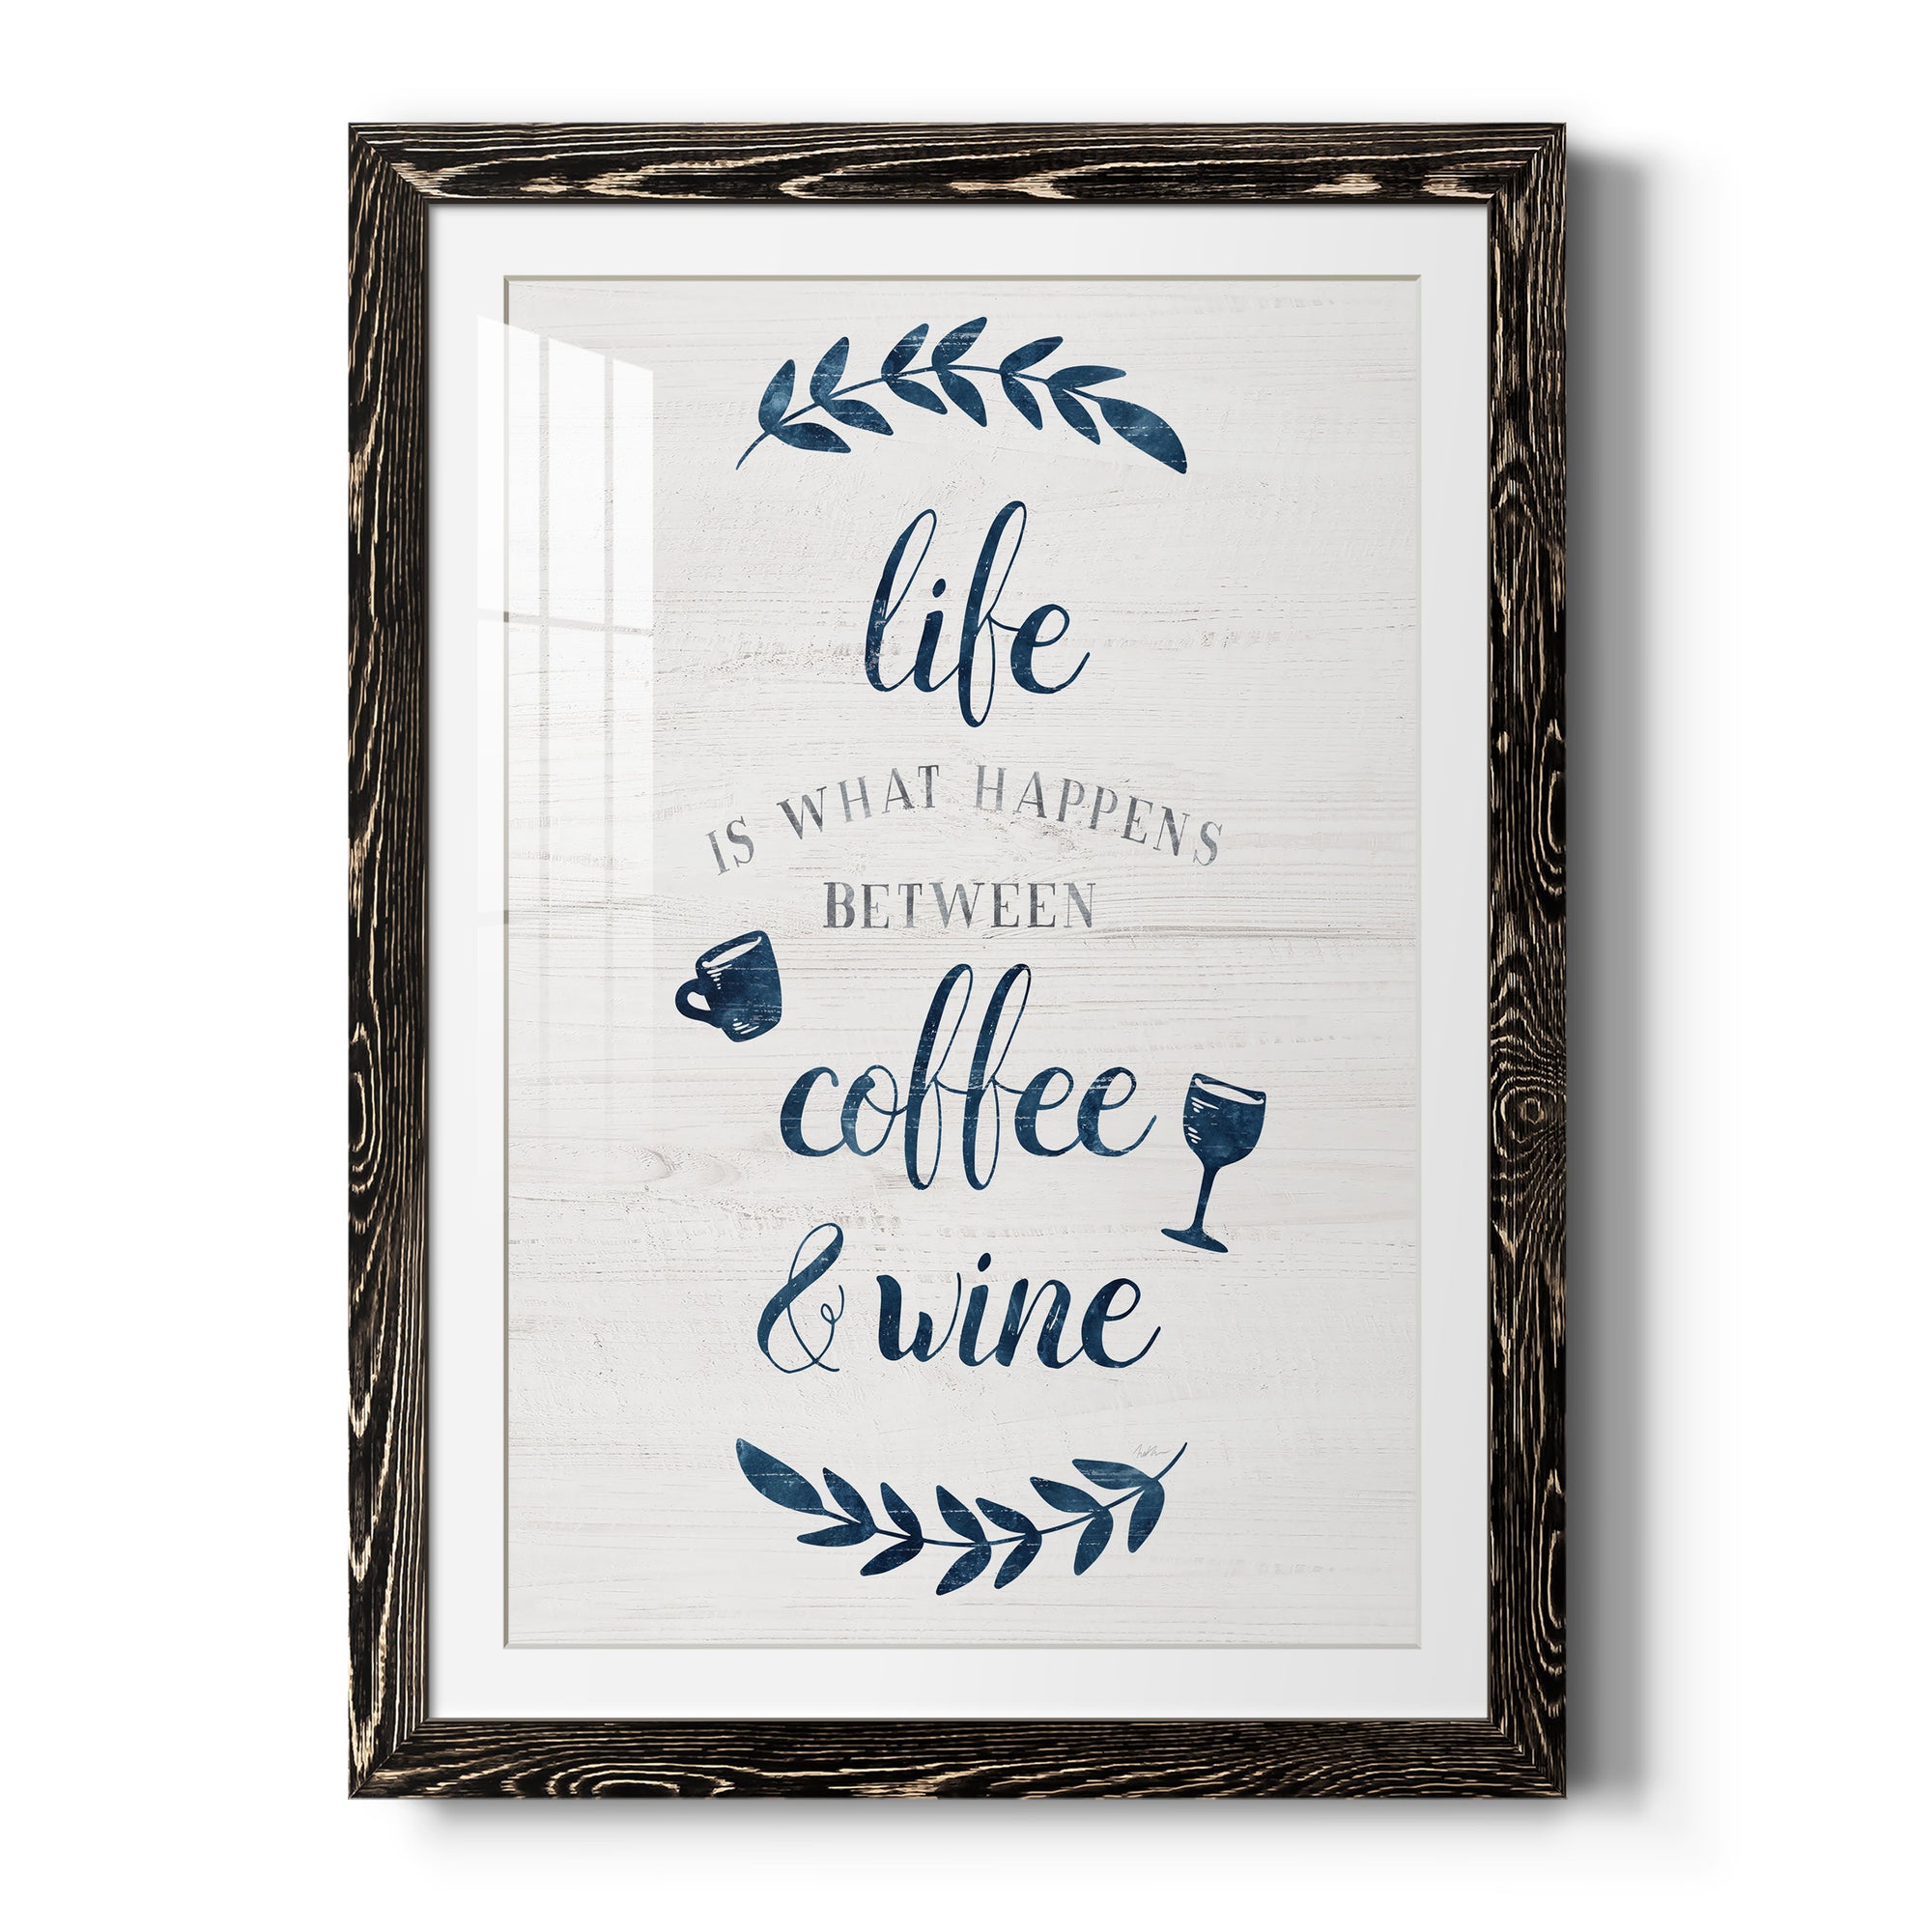 Between Coffee and Wine - Premium Framed Print - Distressed Barnwood Frame - Ready to Hang